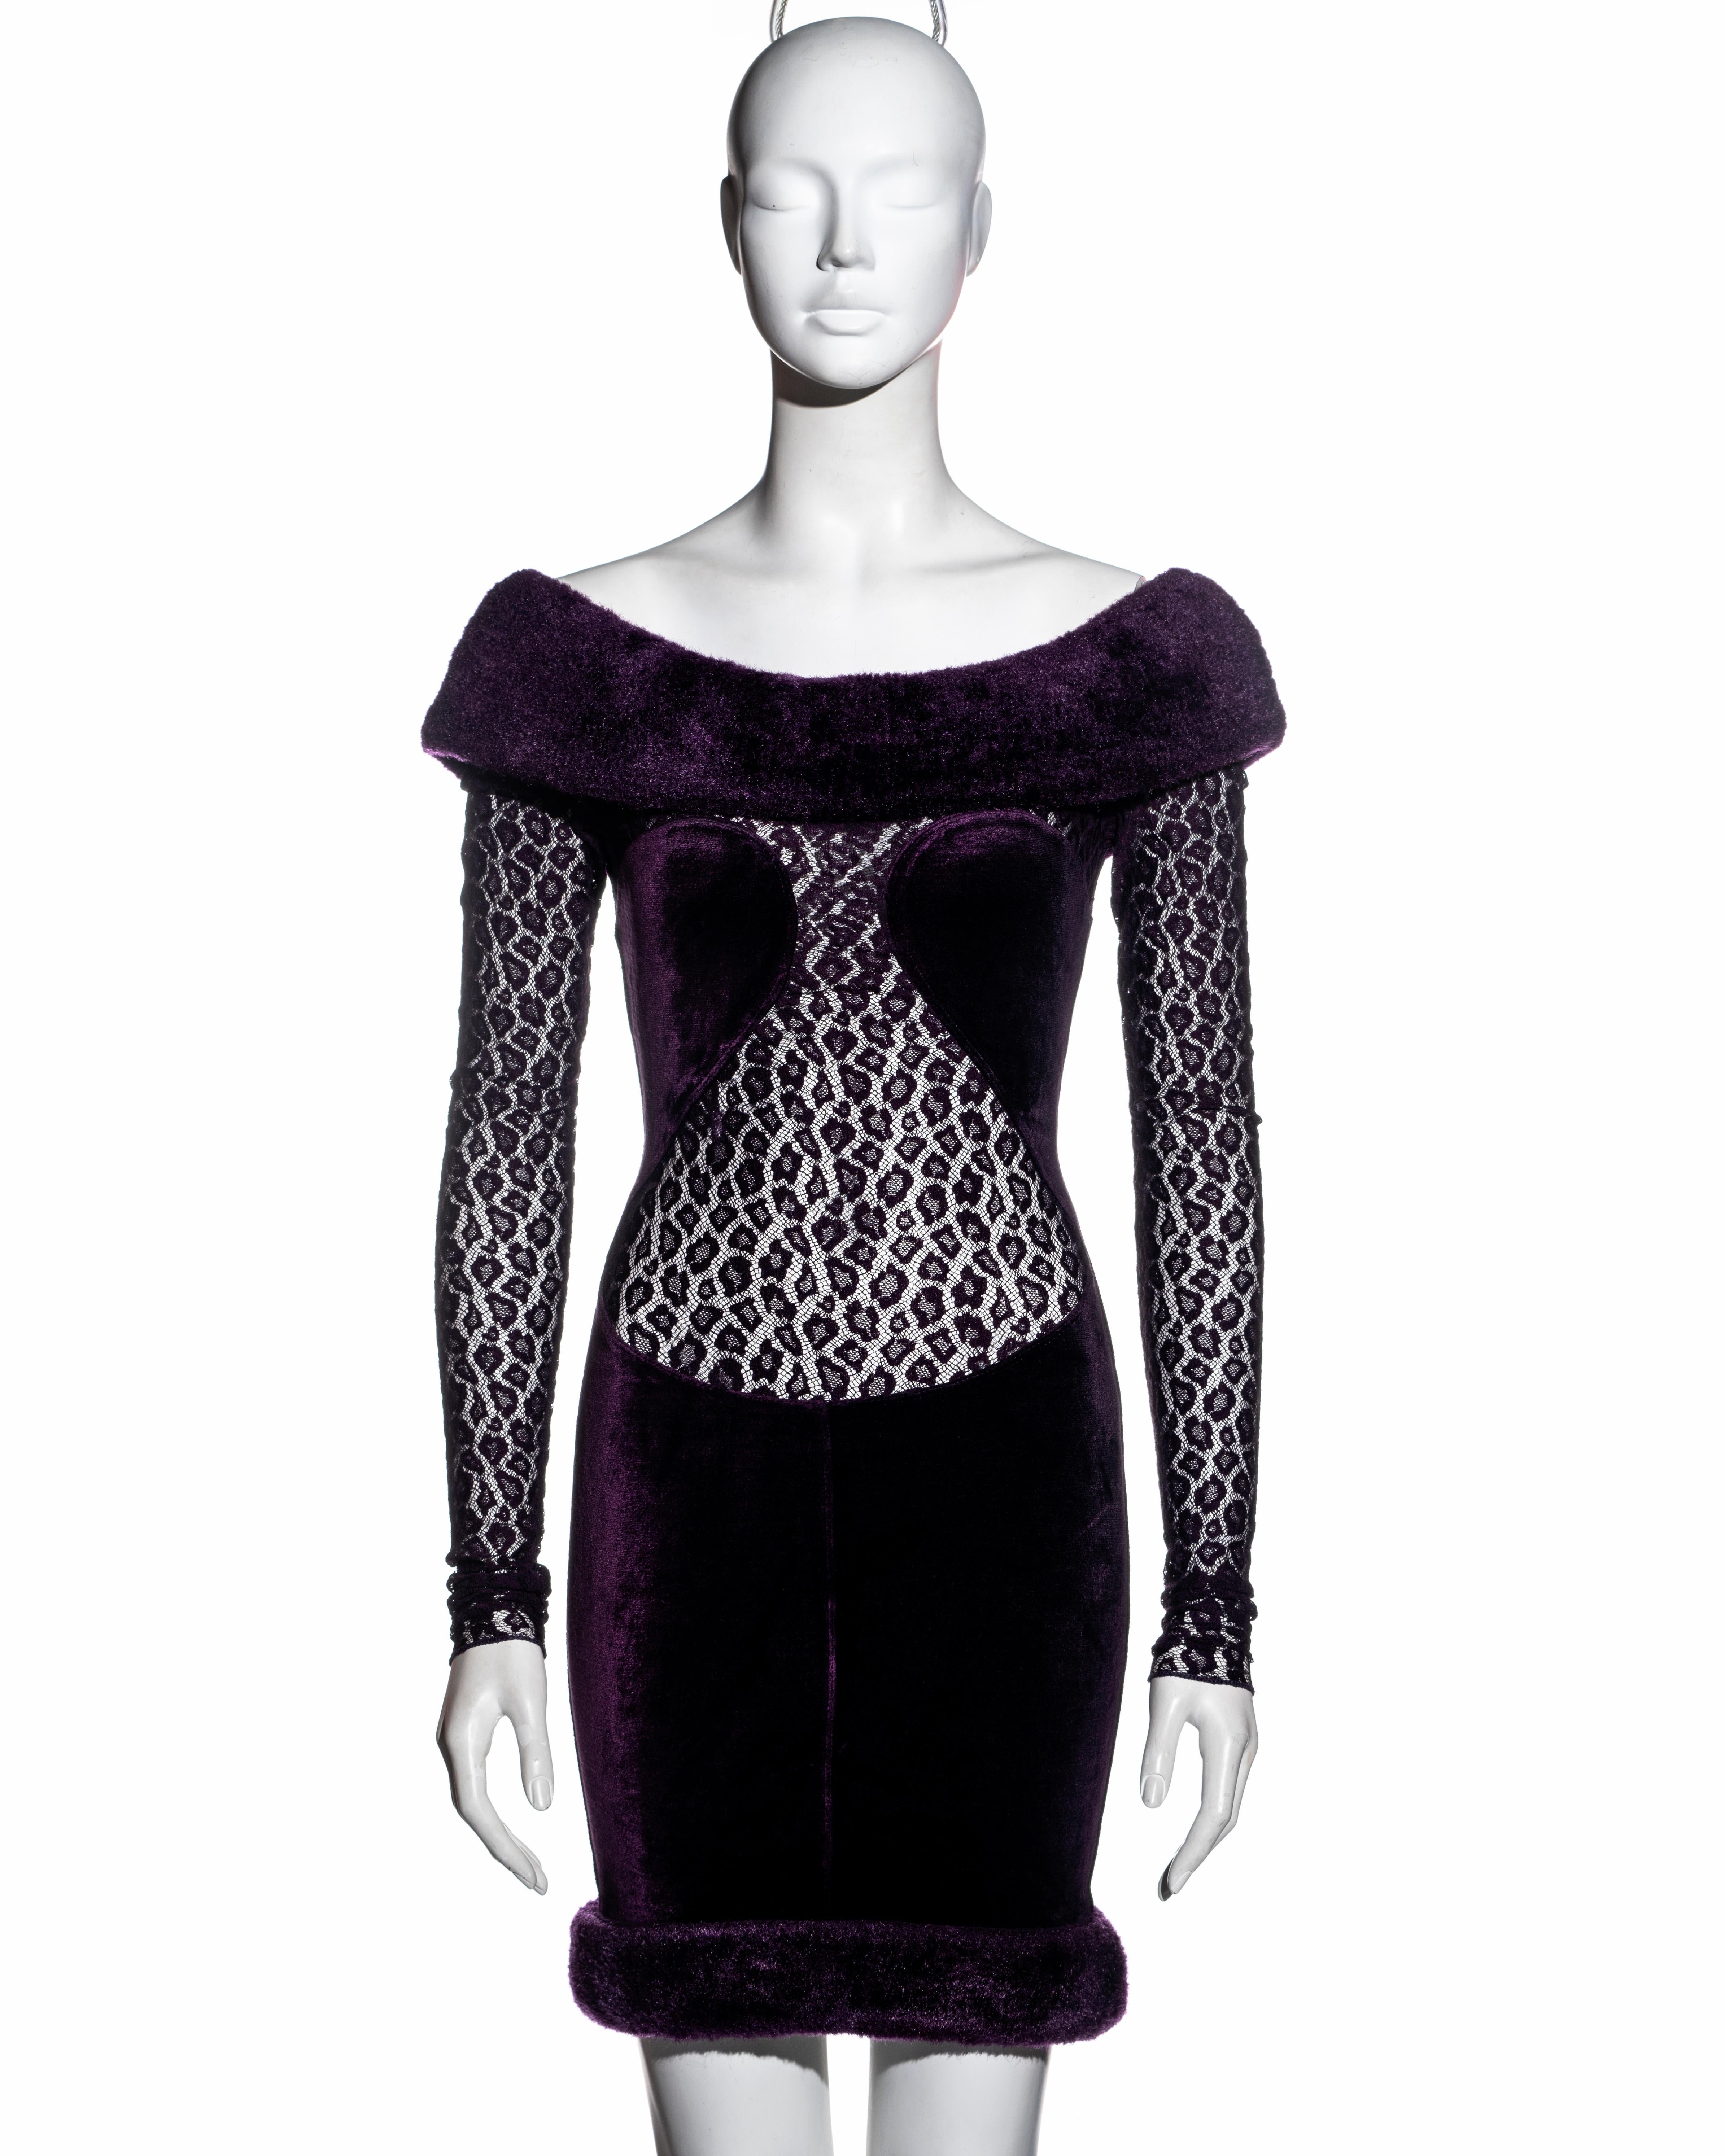 ▪ Important Azzedine Alaia purple stretch velvet off-shoulder evening dress
▪ Large chenille bands around the hem and neckline 
▪ Skin-baring leopard-lace panels at the bust and sleeves 
▪ Fitted skirt 
▪ Concealed zipper 
▪ Size Small
▪ Fall-Winter